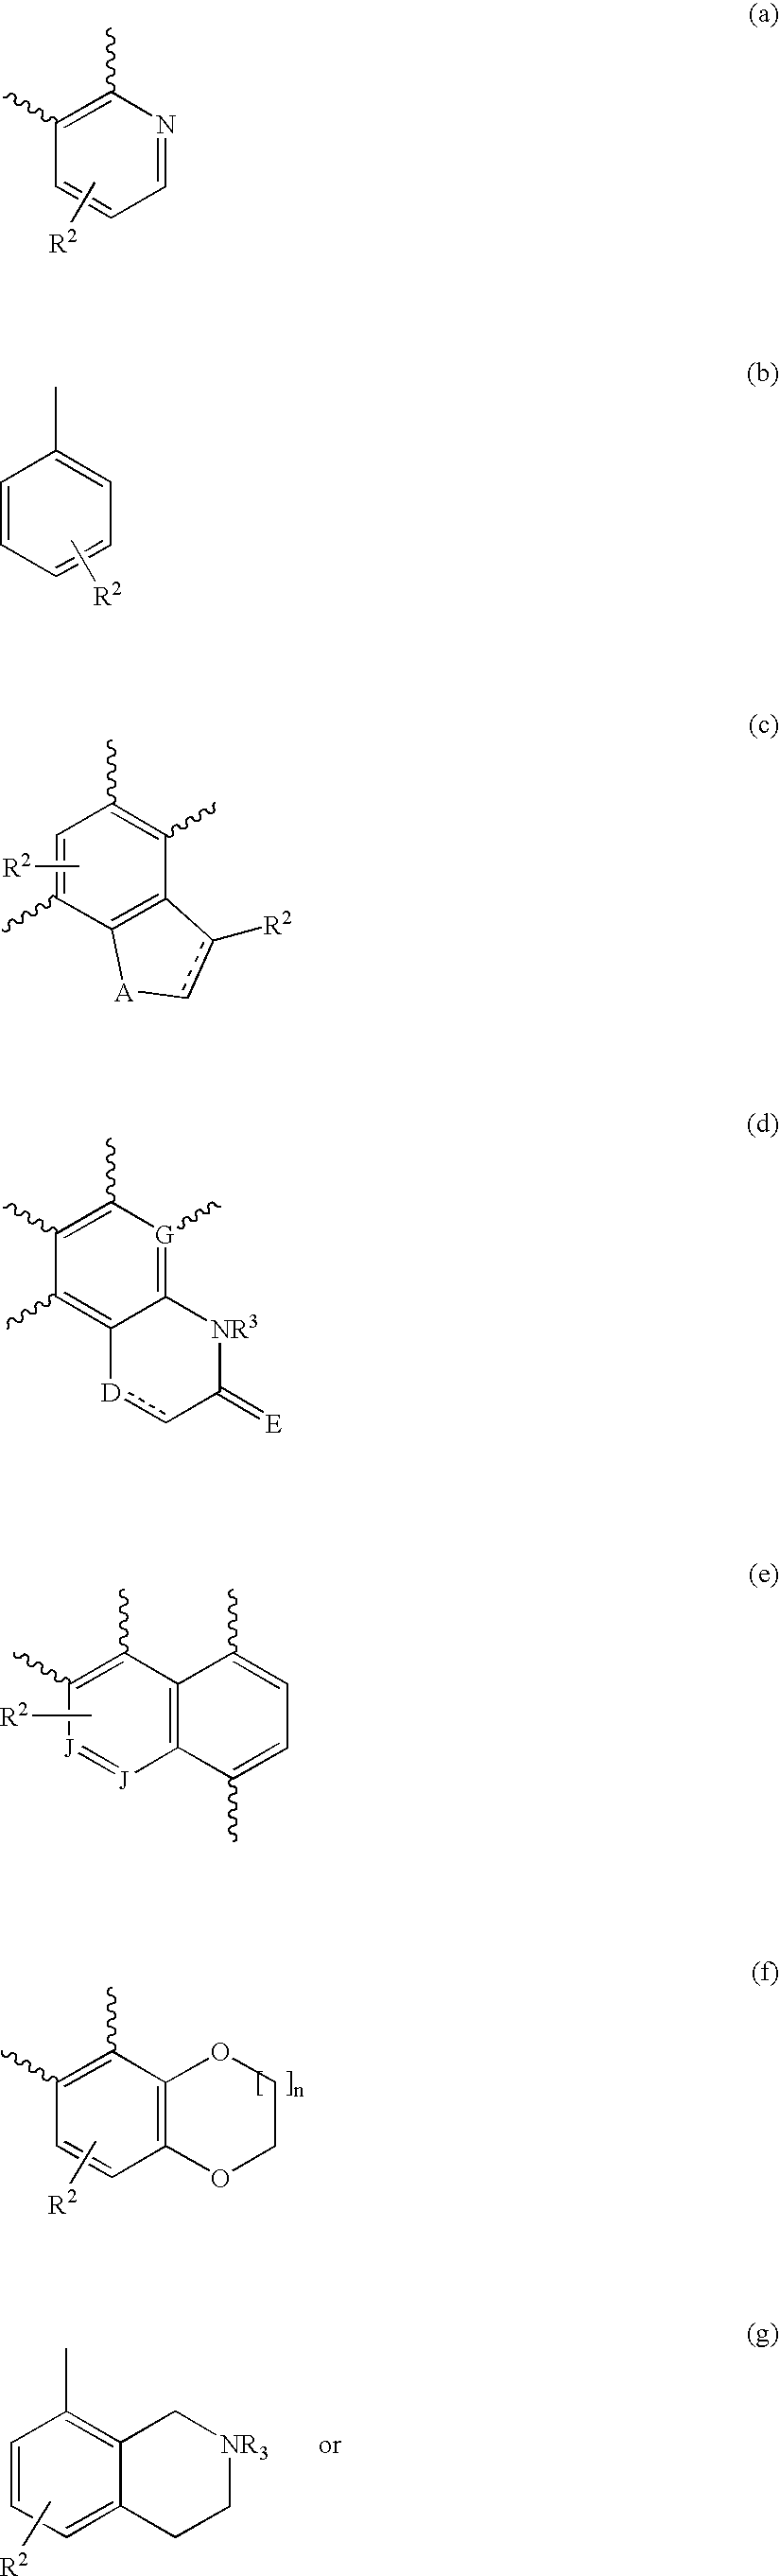 3' substituted compounds having 5-ht6 receptor affinity